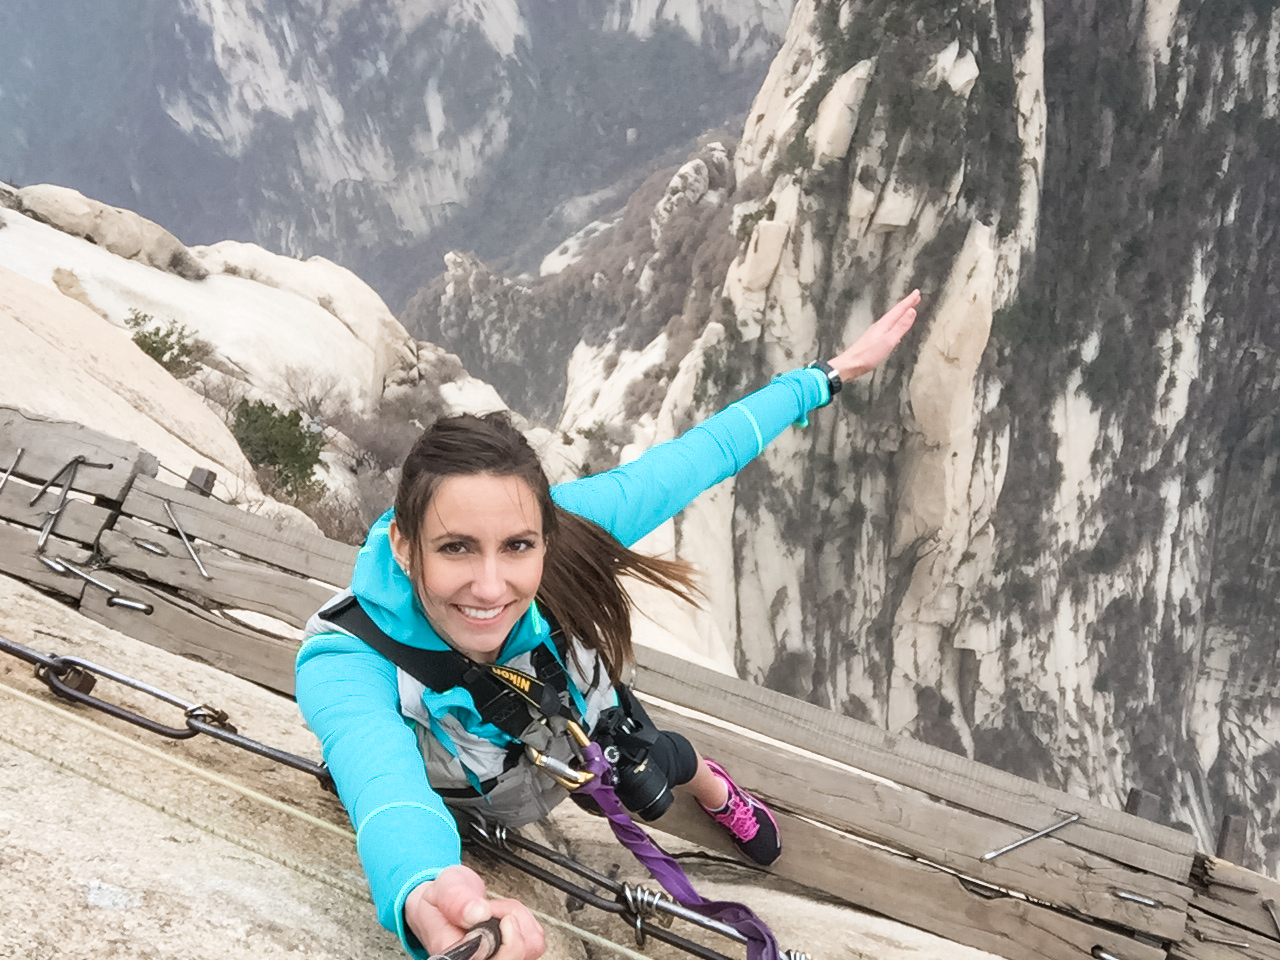 Mount Huashan's infamous plank walk in China